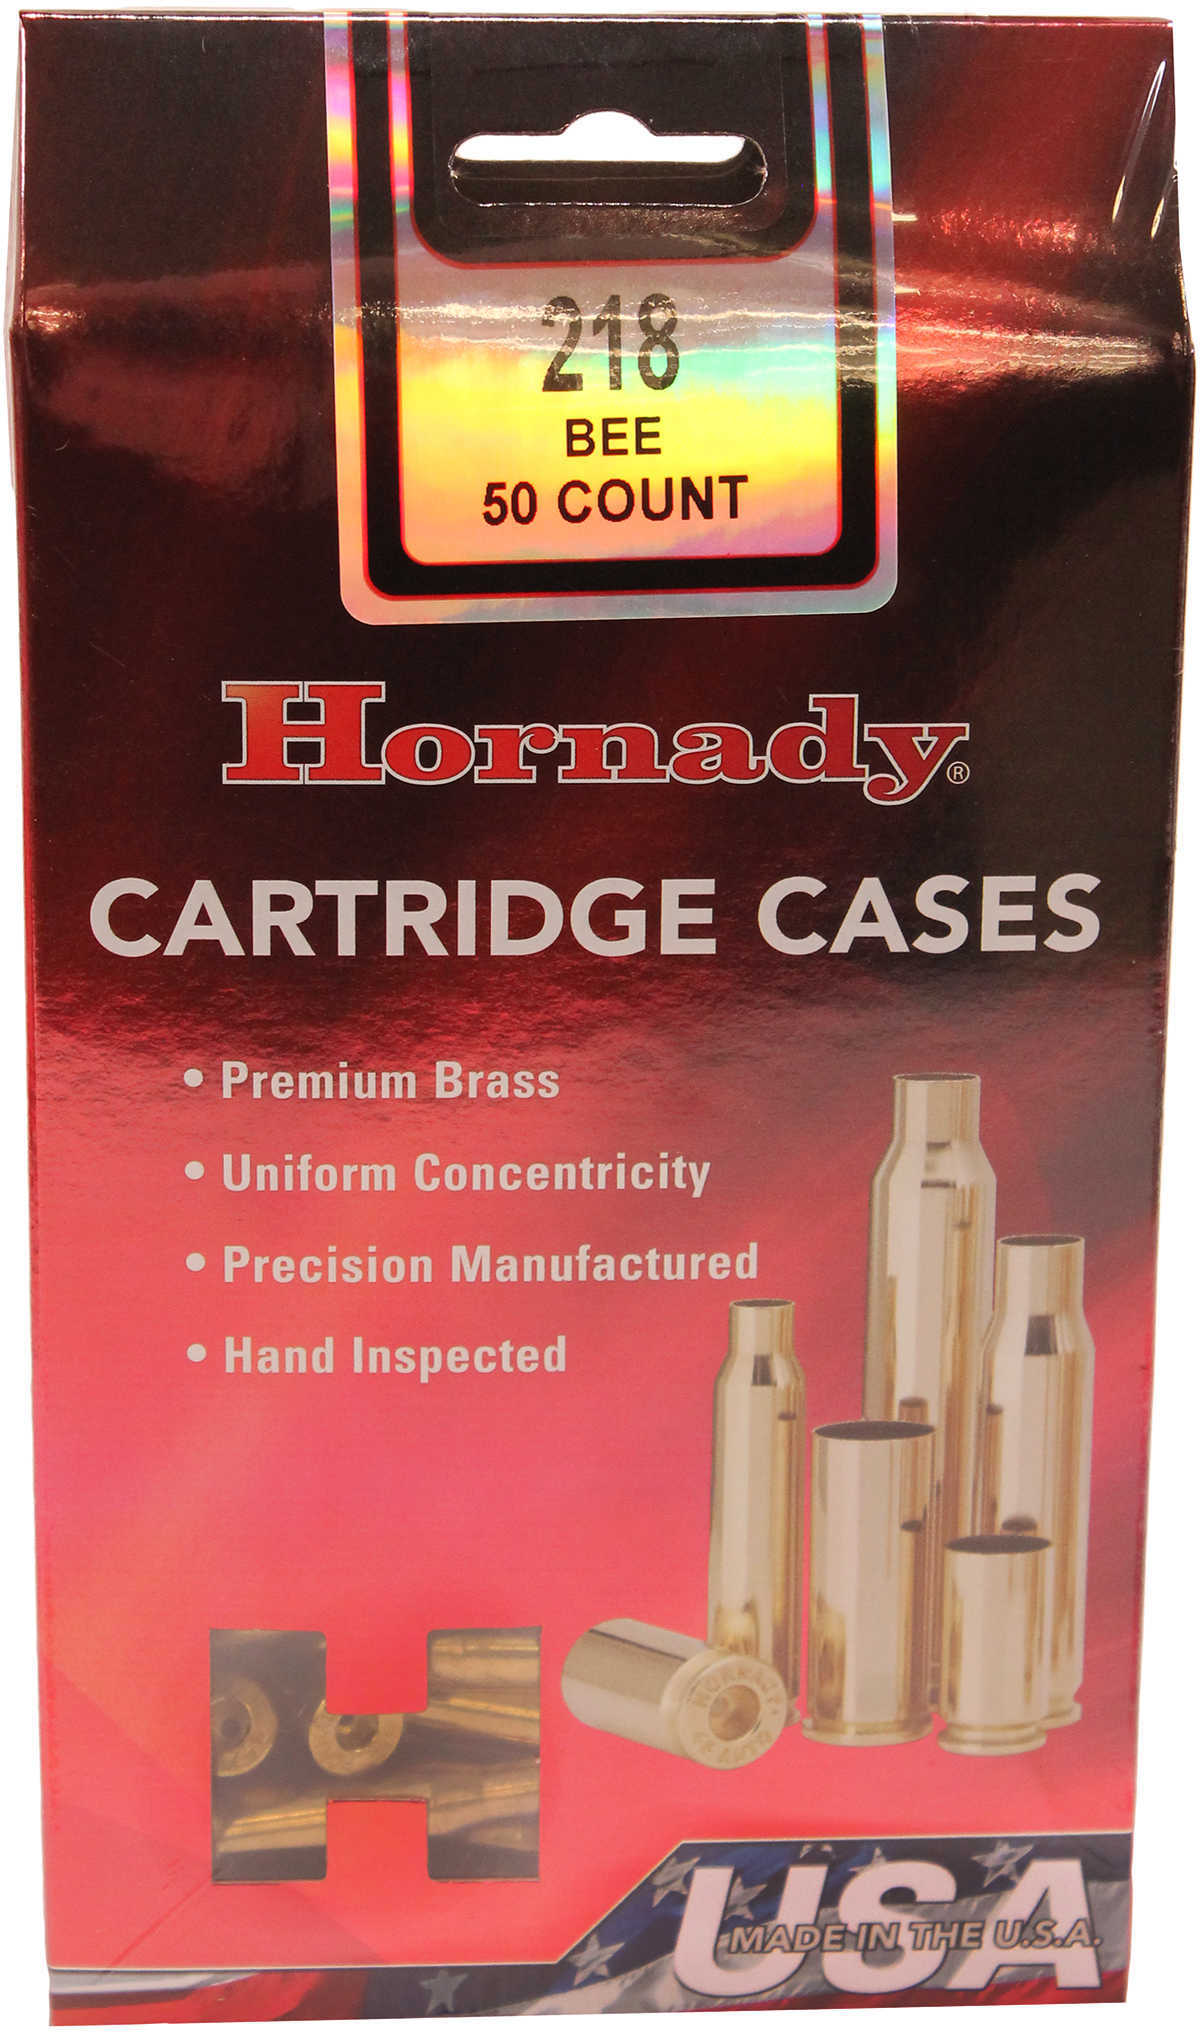 Hornady 8601 Unprimed Cases 218 Winchester Bee